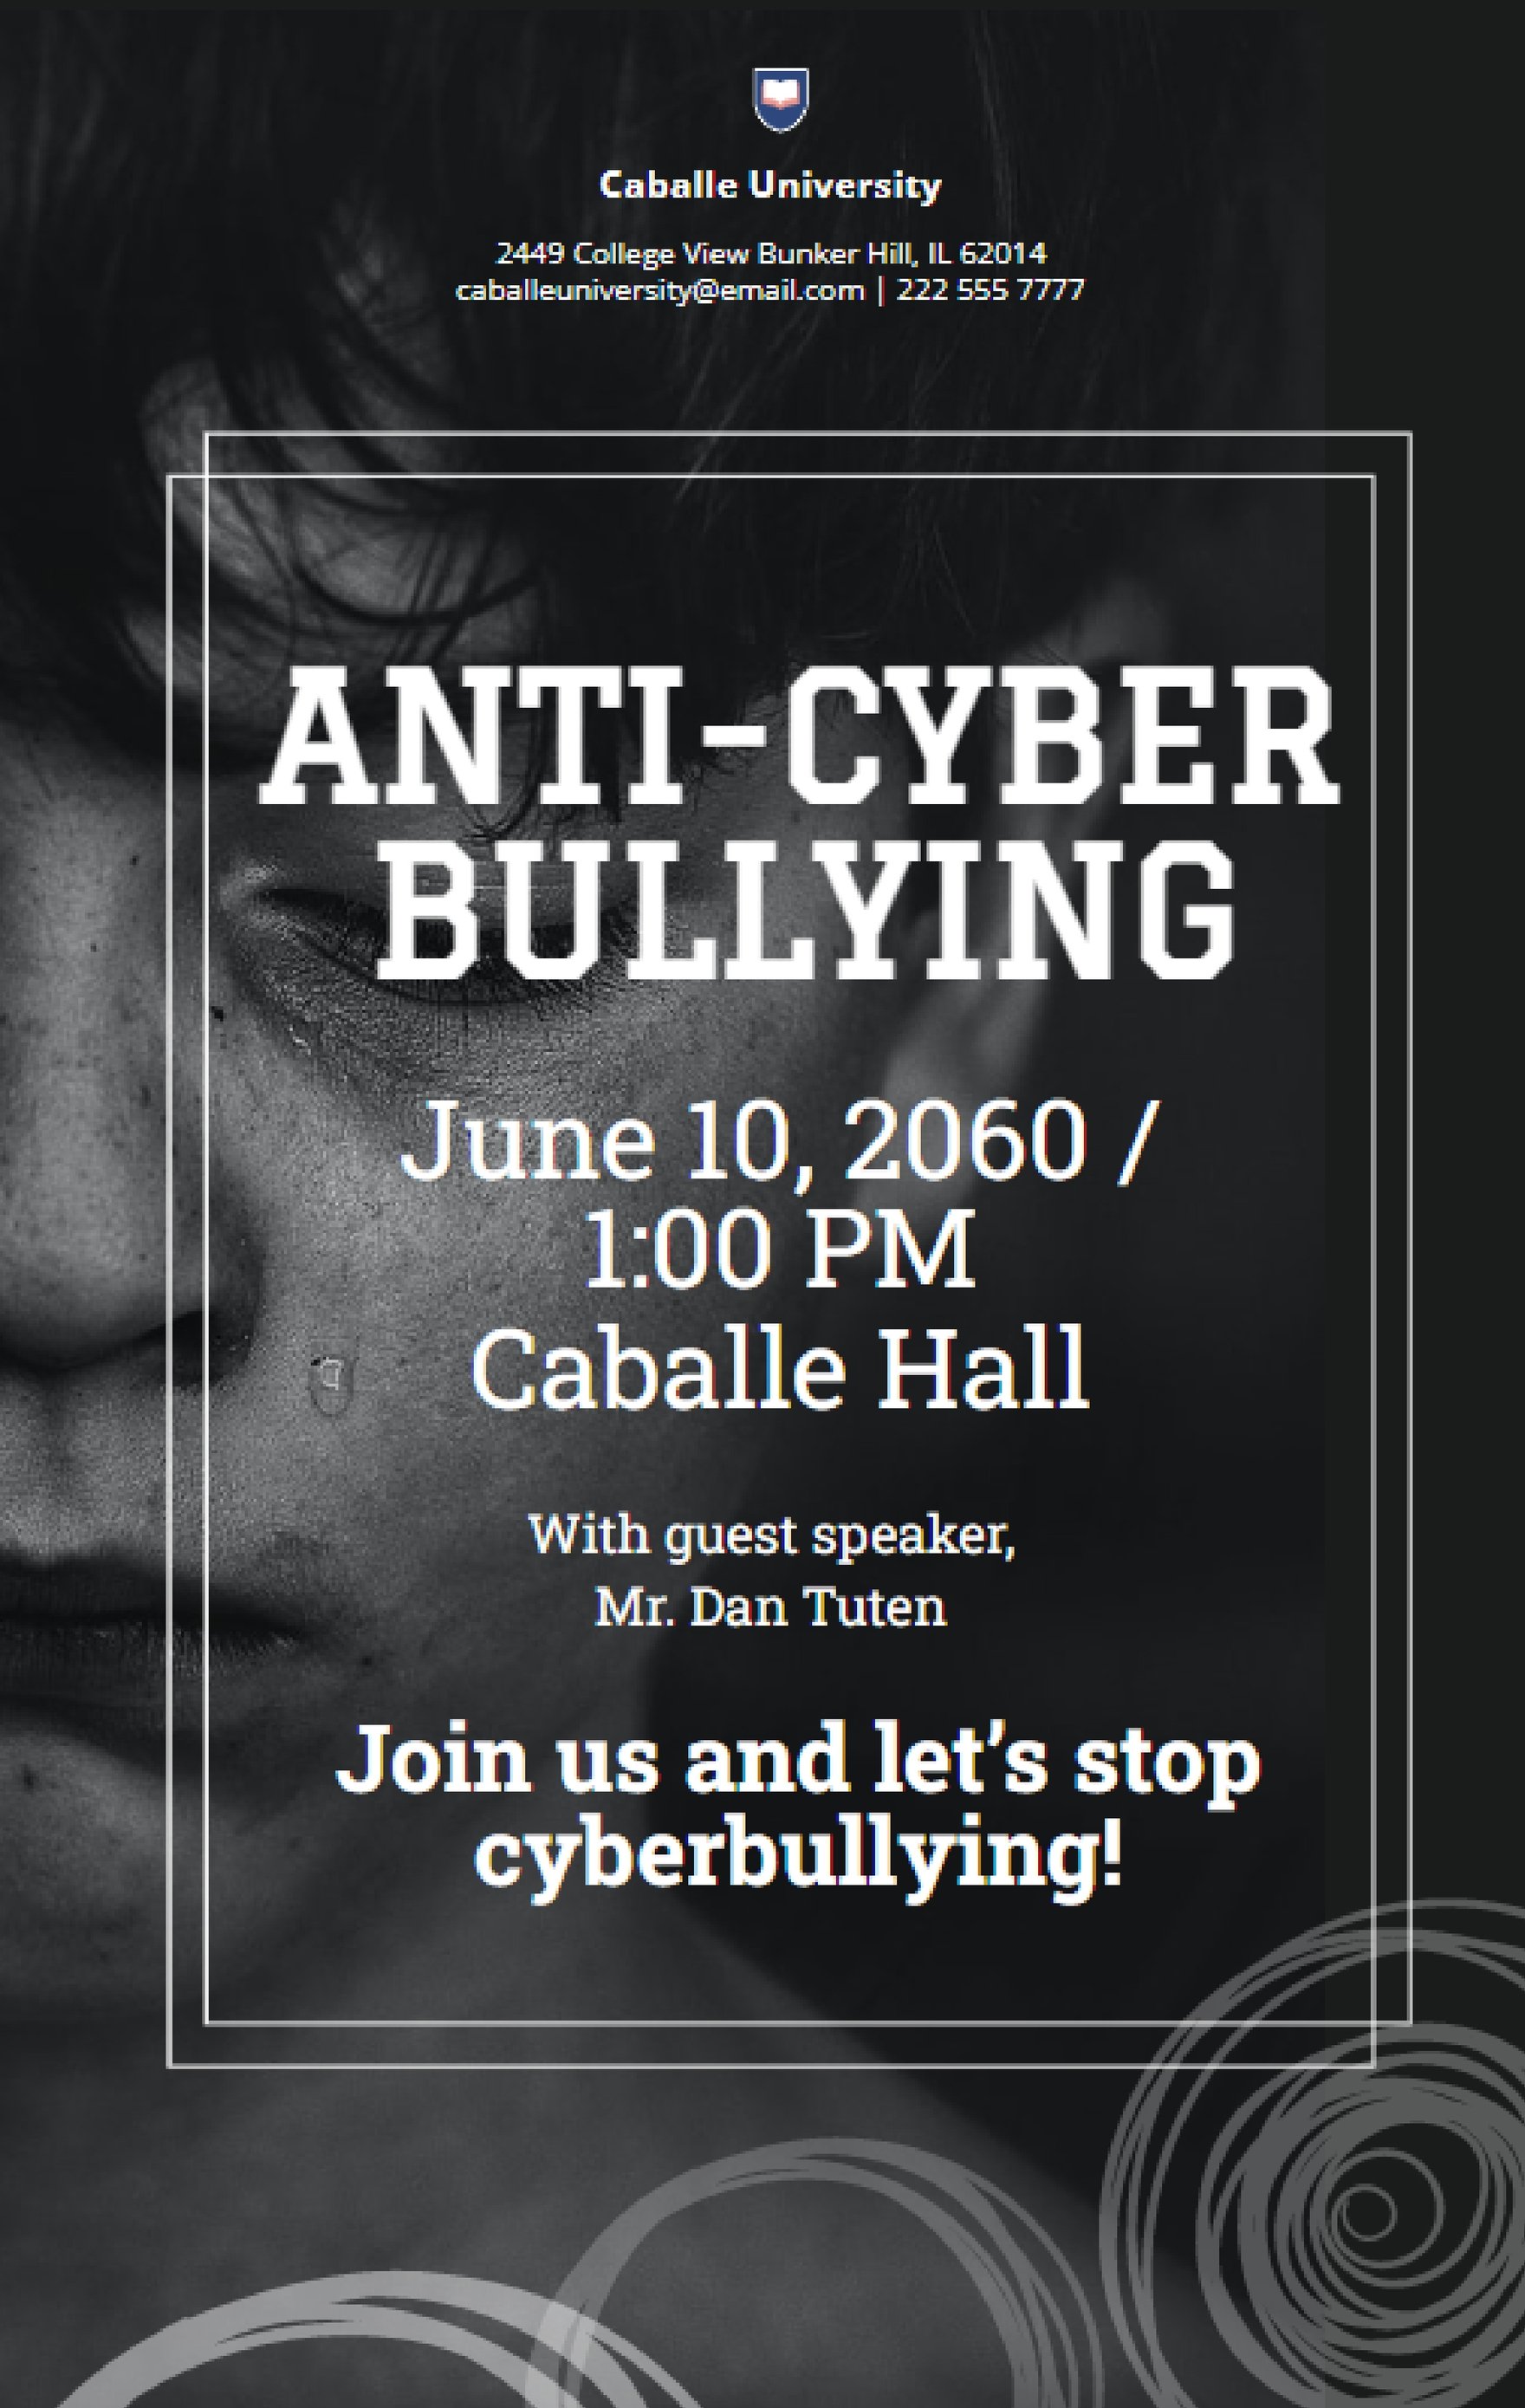 Anti Cyber Bullying Poster Template in Word, Illustrator, PSD, Publisher